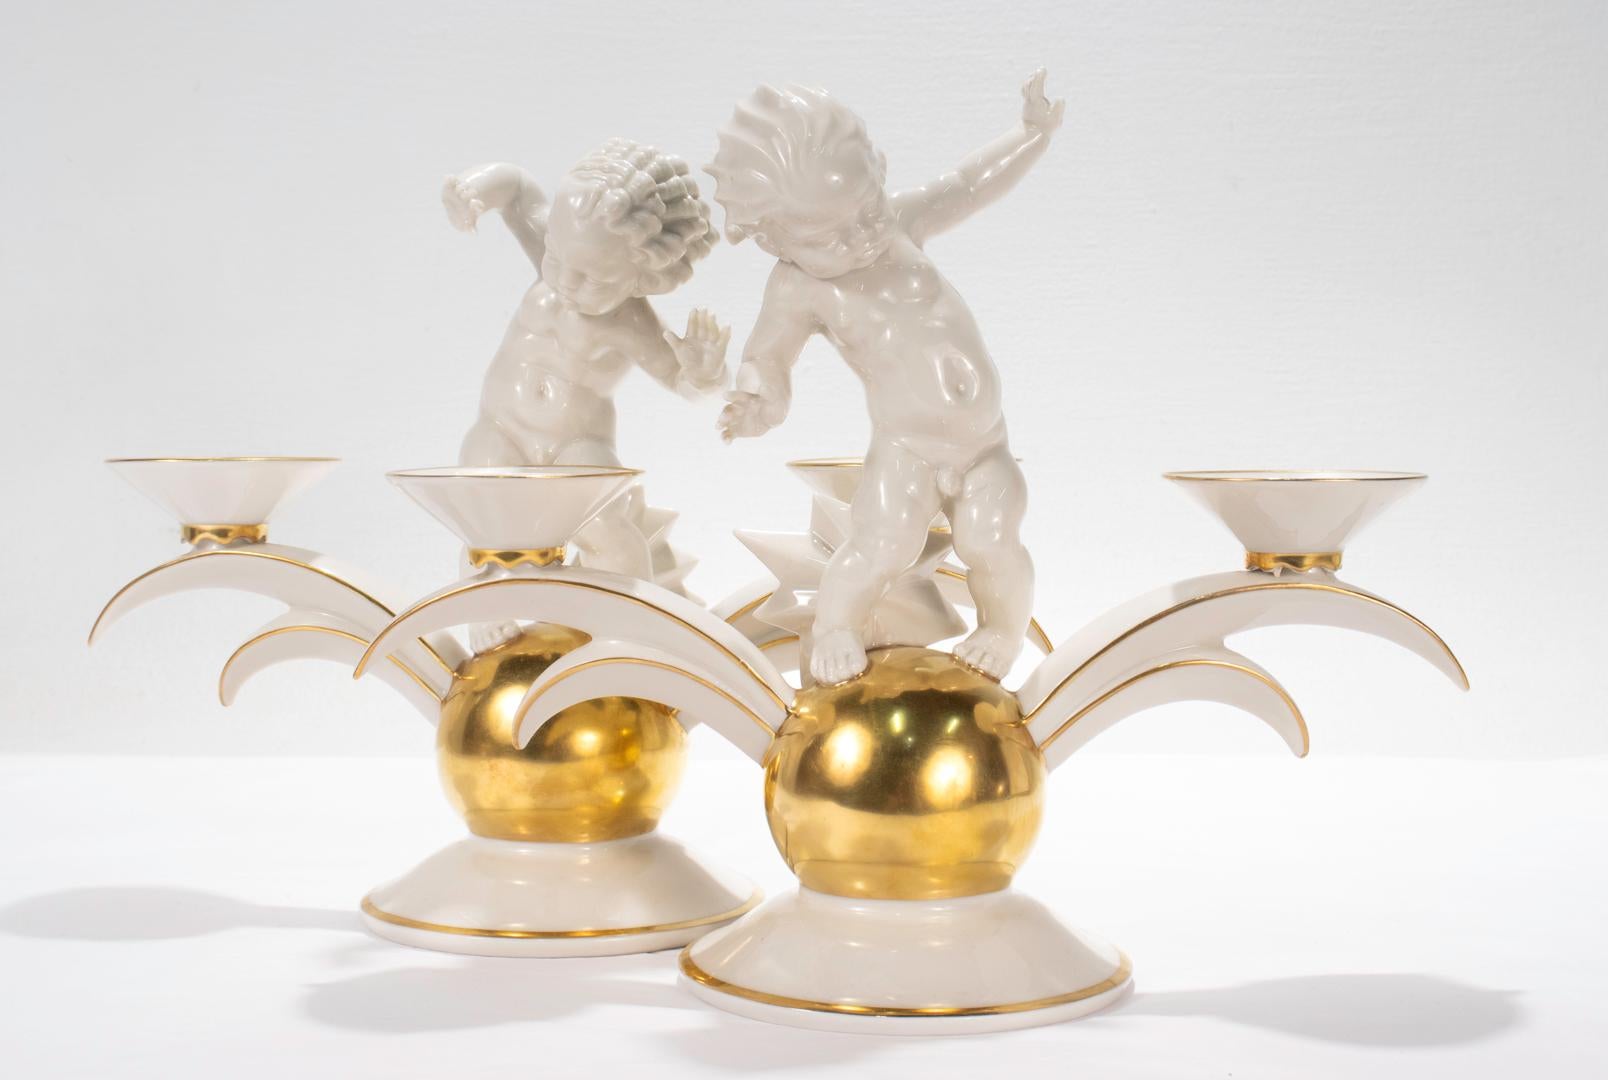 A fine pair of German Art Deco porcelain candelabra.

By the Kunstabteilung (Art Department) of the Hutschenreuther Porcelain Manufactory.

Designed by Karl Tutter.

Each depicting a putto or cherub standing on a golden sphere between the two arms